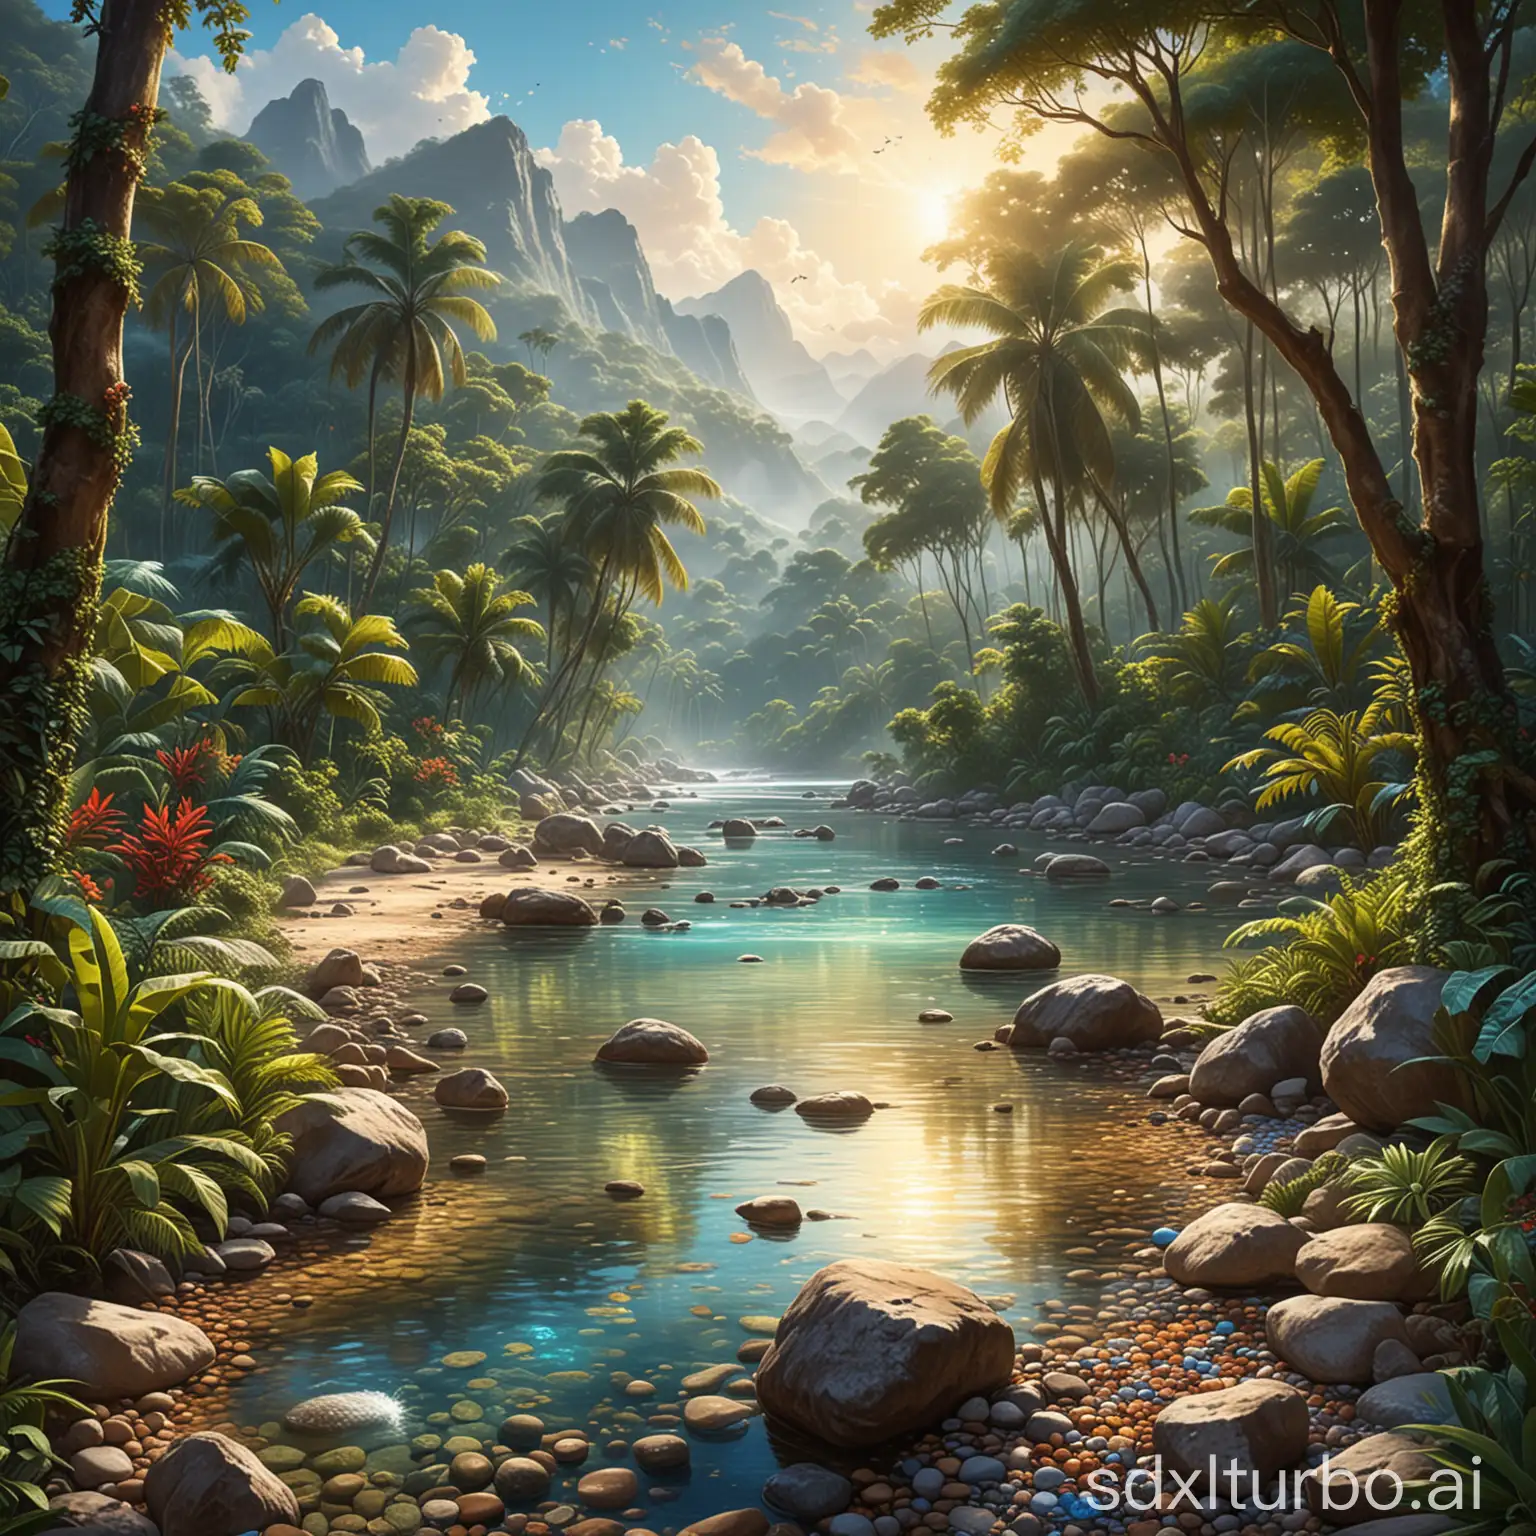 The pure land of the earth: a vibrant tropical rainforest, with sunlight streaming through dense canopies, casting golden patches on the ground. A clear river winds through it, with colorful pebbles visible on the riverbed, and fish happily darting through the water. The sky is a boundless azure, adorned with a few wispy clouds. In the distance, majestic mountains stand tall, their snow-capped peaks shimmering in the sunlight. In this realistic painting style, vibrant and harmonious hues are used to emphasize the rich colors and details of nature, such as the intricate vegetation of the tropical rainforest, diverse wildlife, and the crystal-clear water quality of the river. Please create a painting with the theme of "harmony of the earth," evoking people's nostalgia and desire to protect the pristine beauty of the earth.